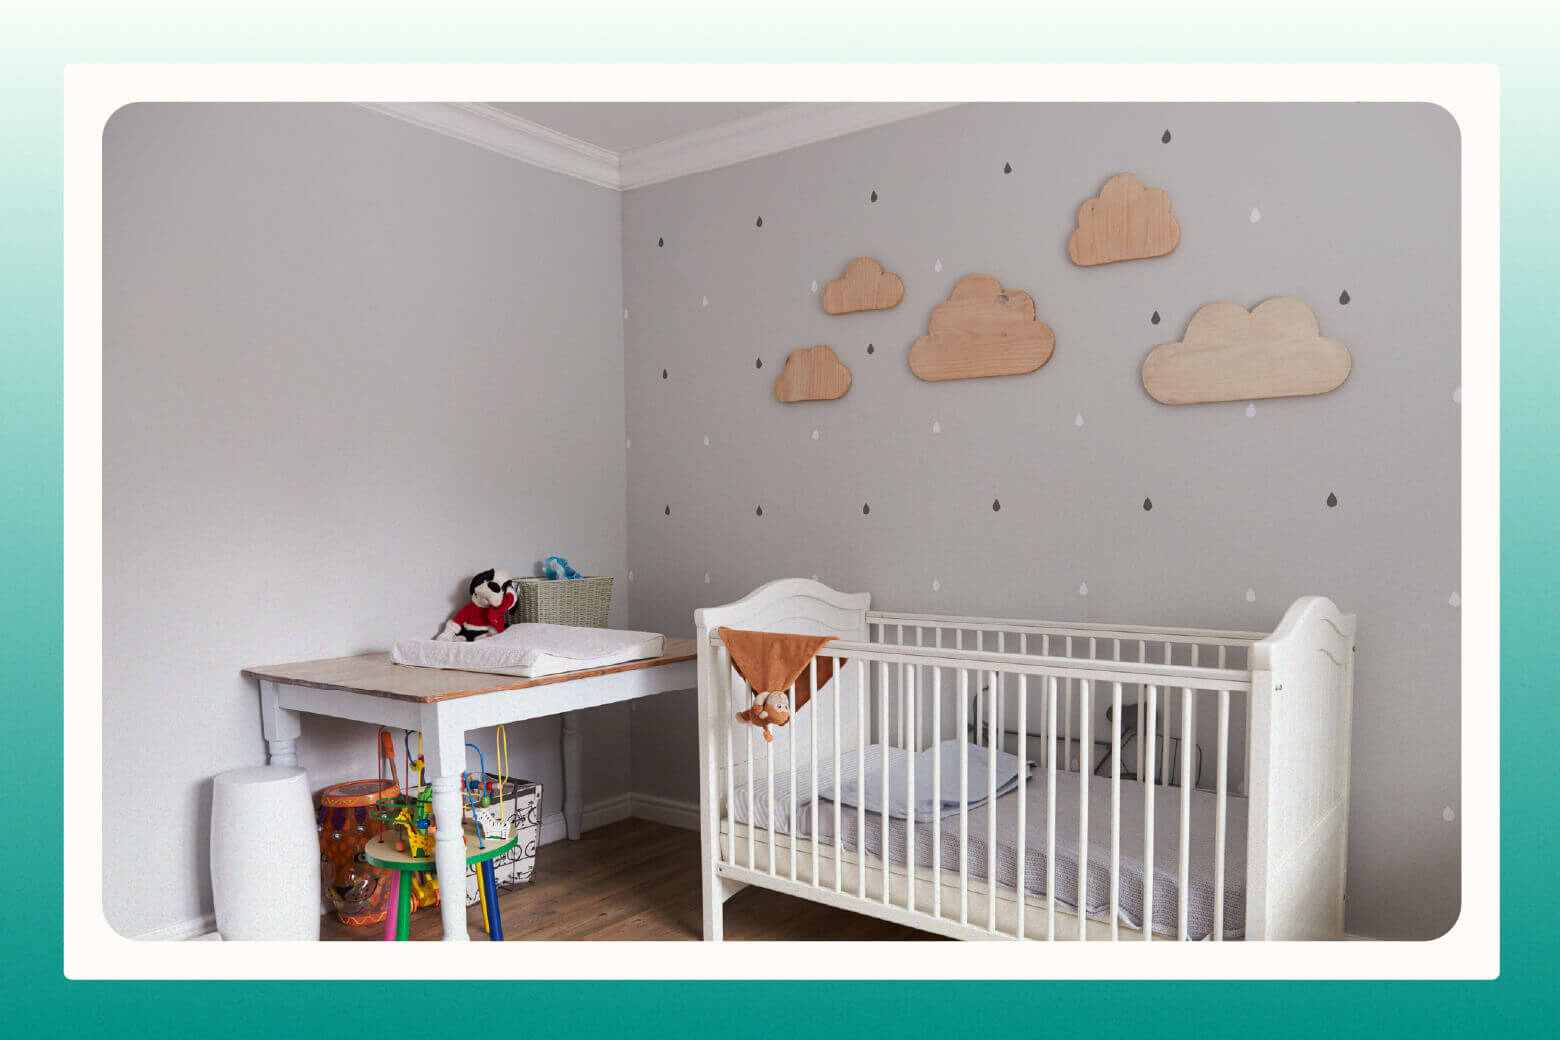 Baby's neutral nursery idea with gray walls that have clouds and raindrops on them